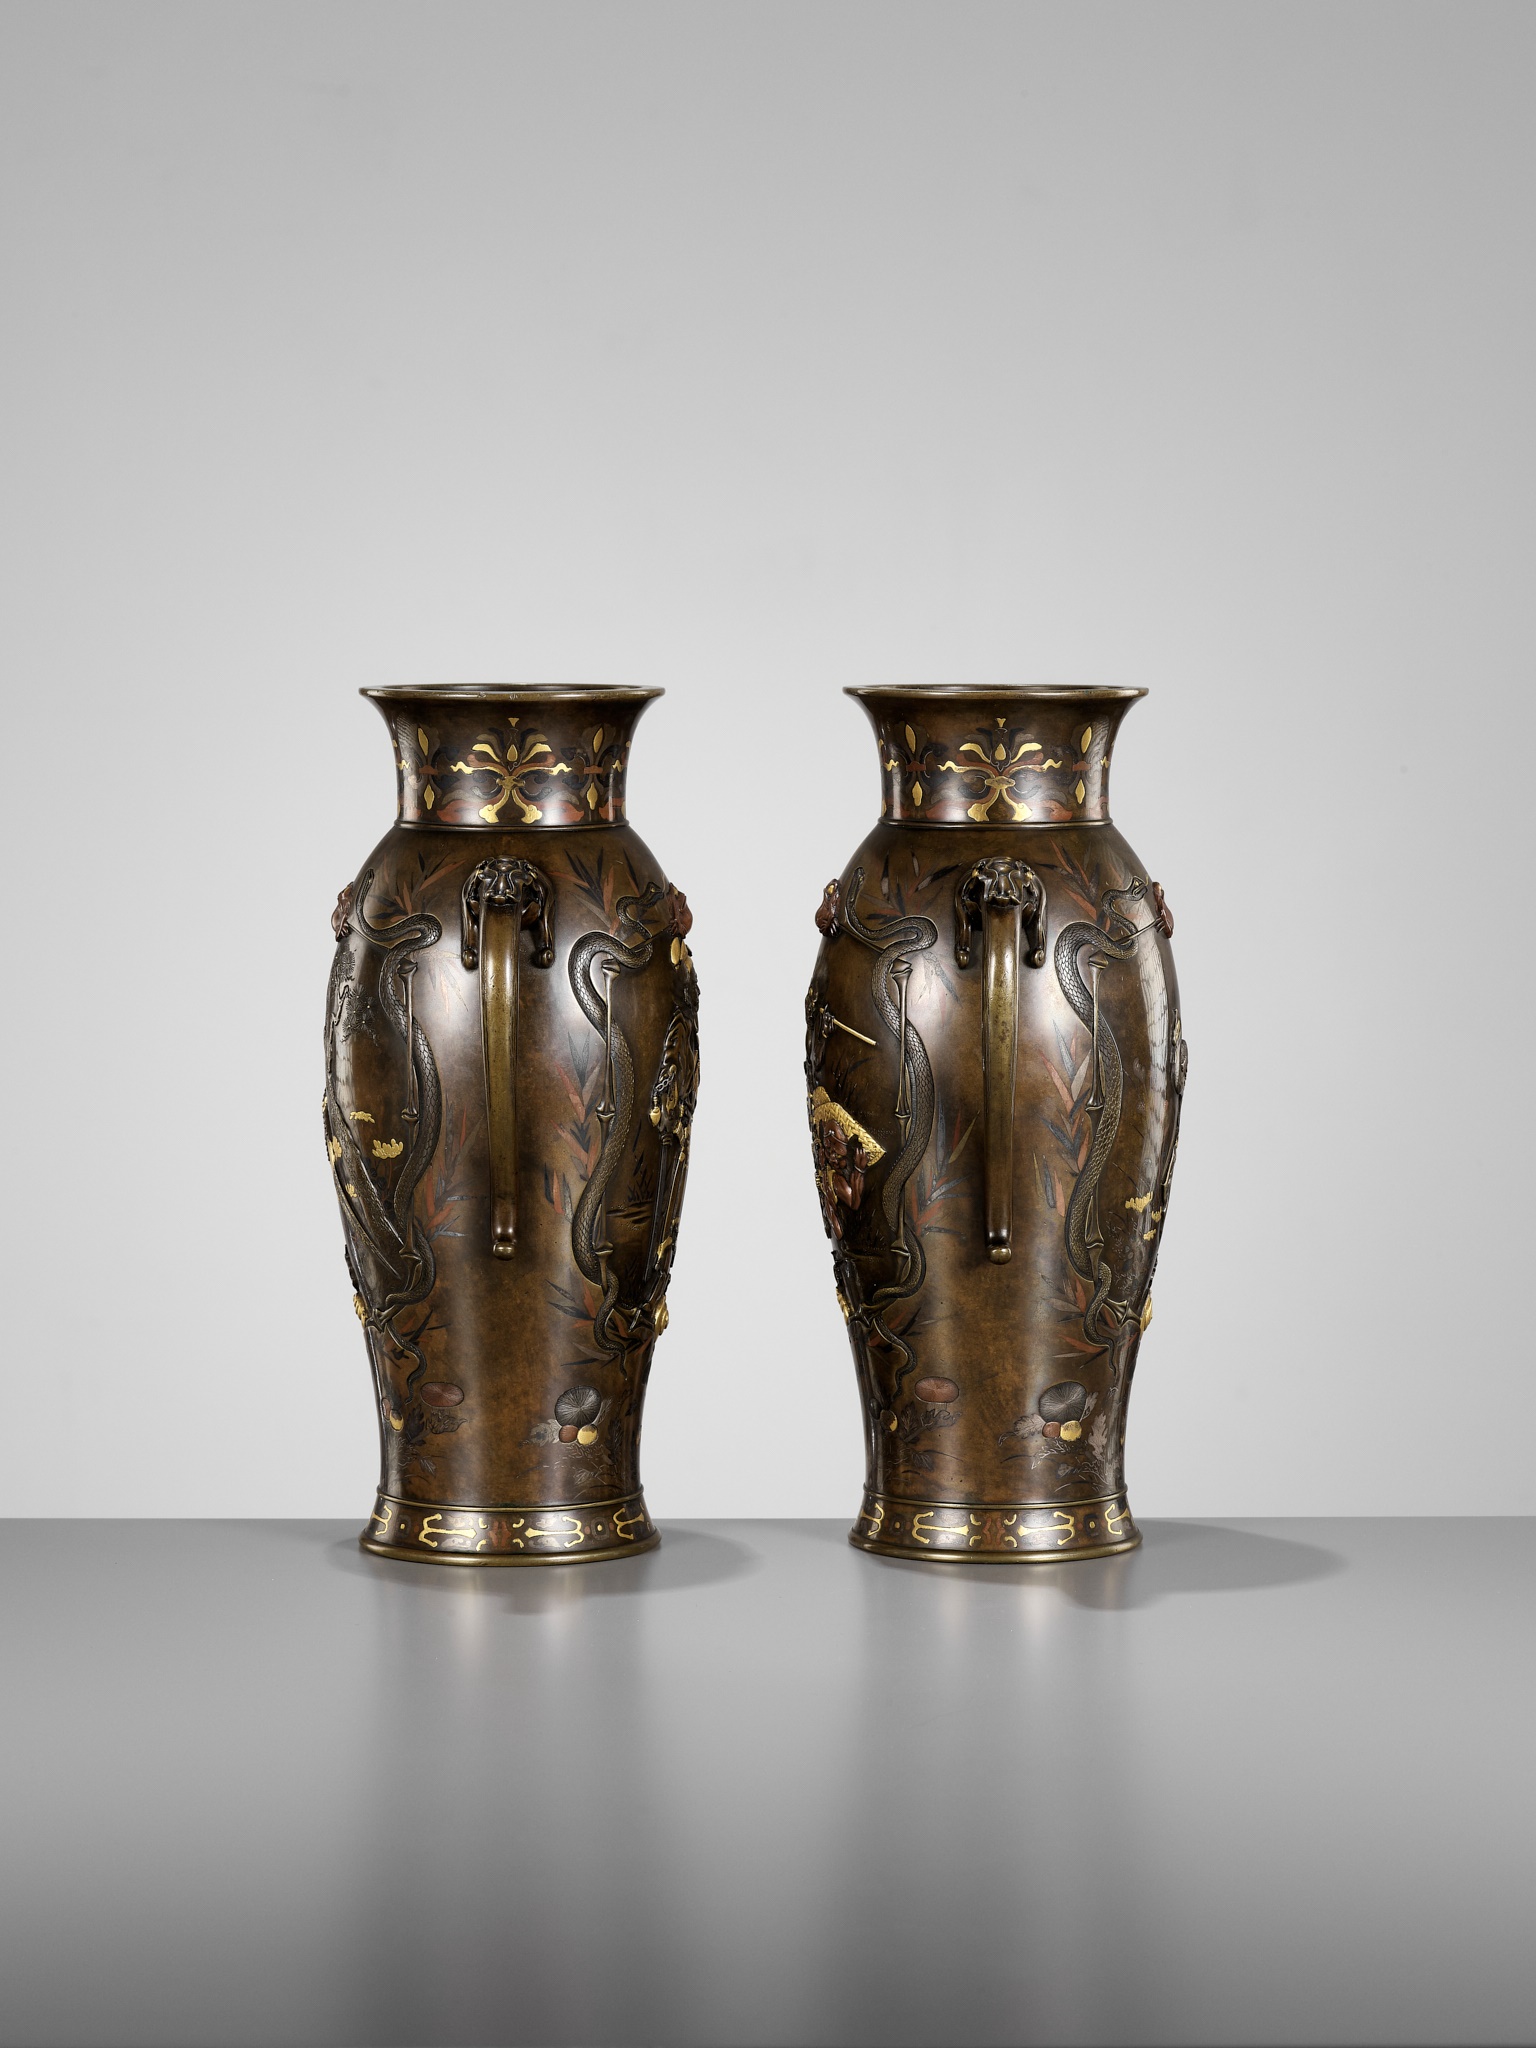 A SUPERB PAIR OF MIYAO-STYLE MIXED-METAL-INLAID AND PARCEL-GILT BRONZE VASES WITH SHOKI AND ONI - Image 13 of 15